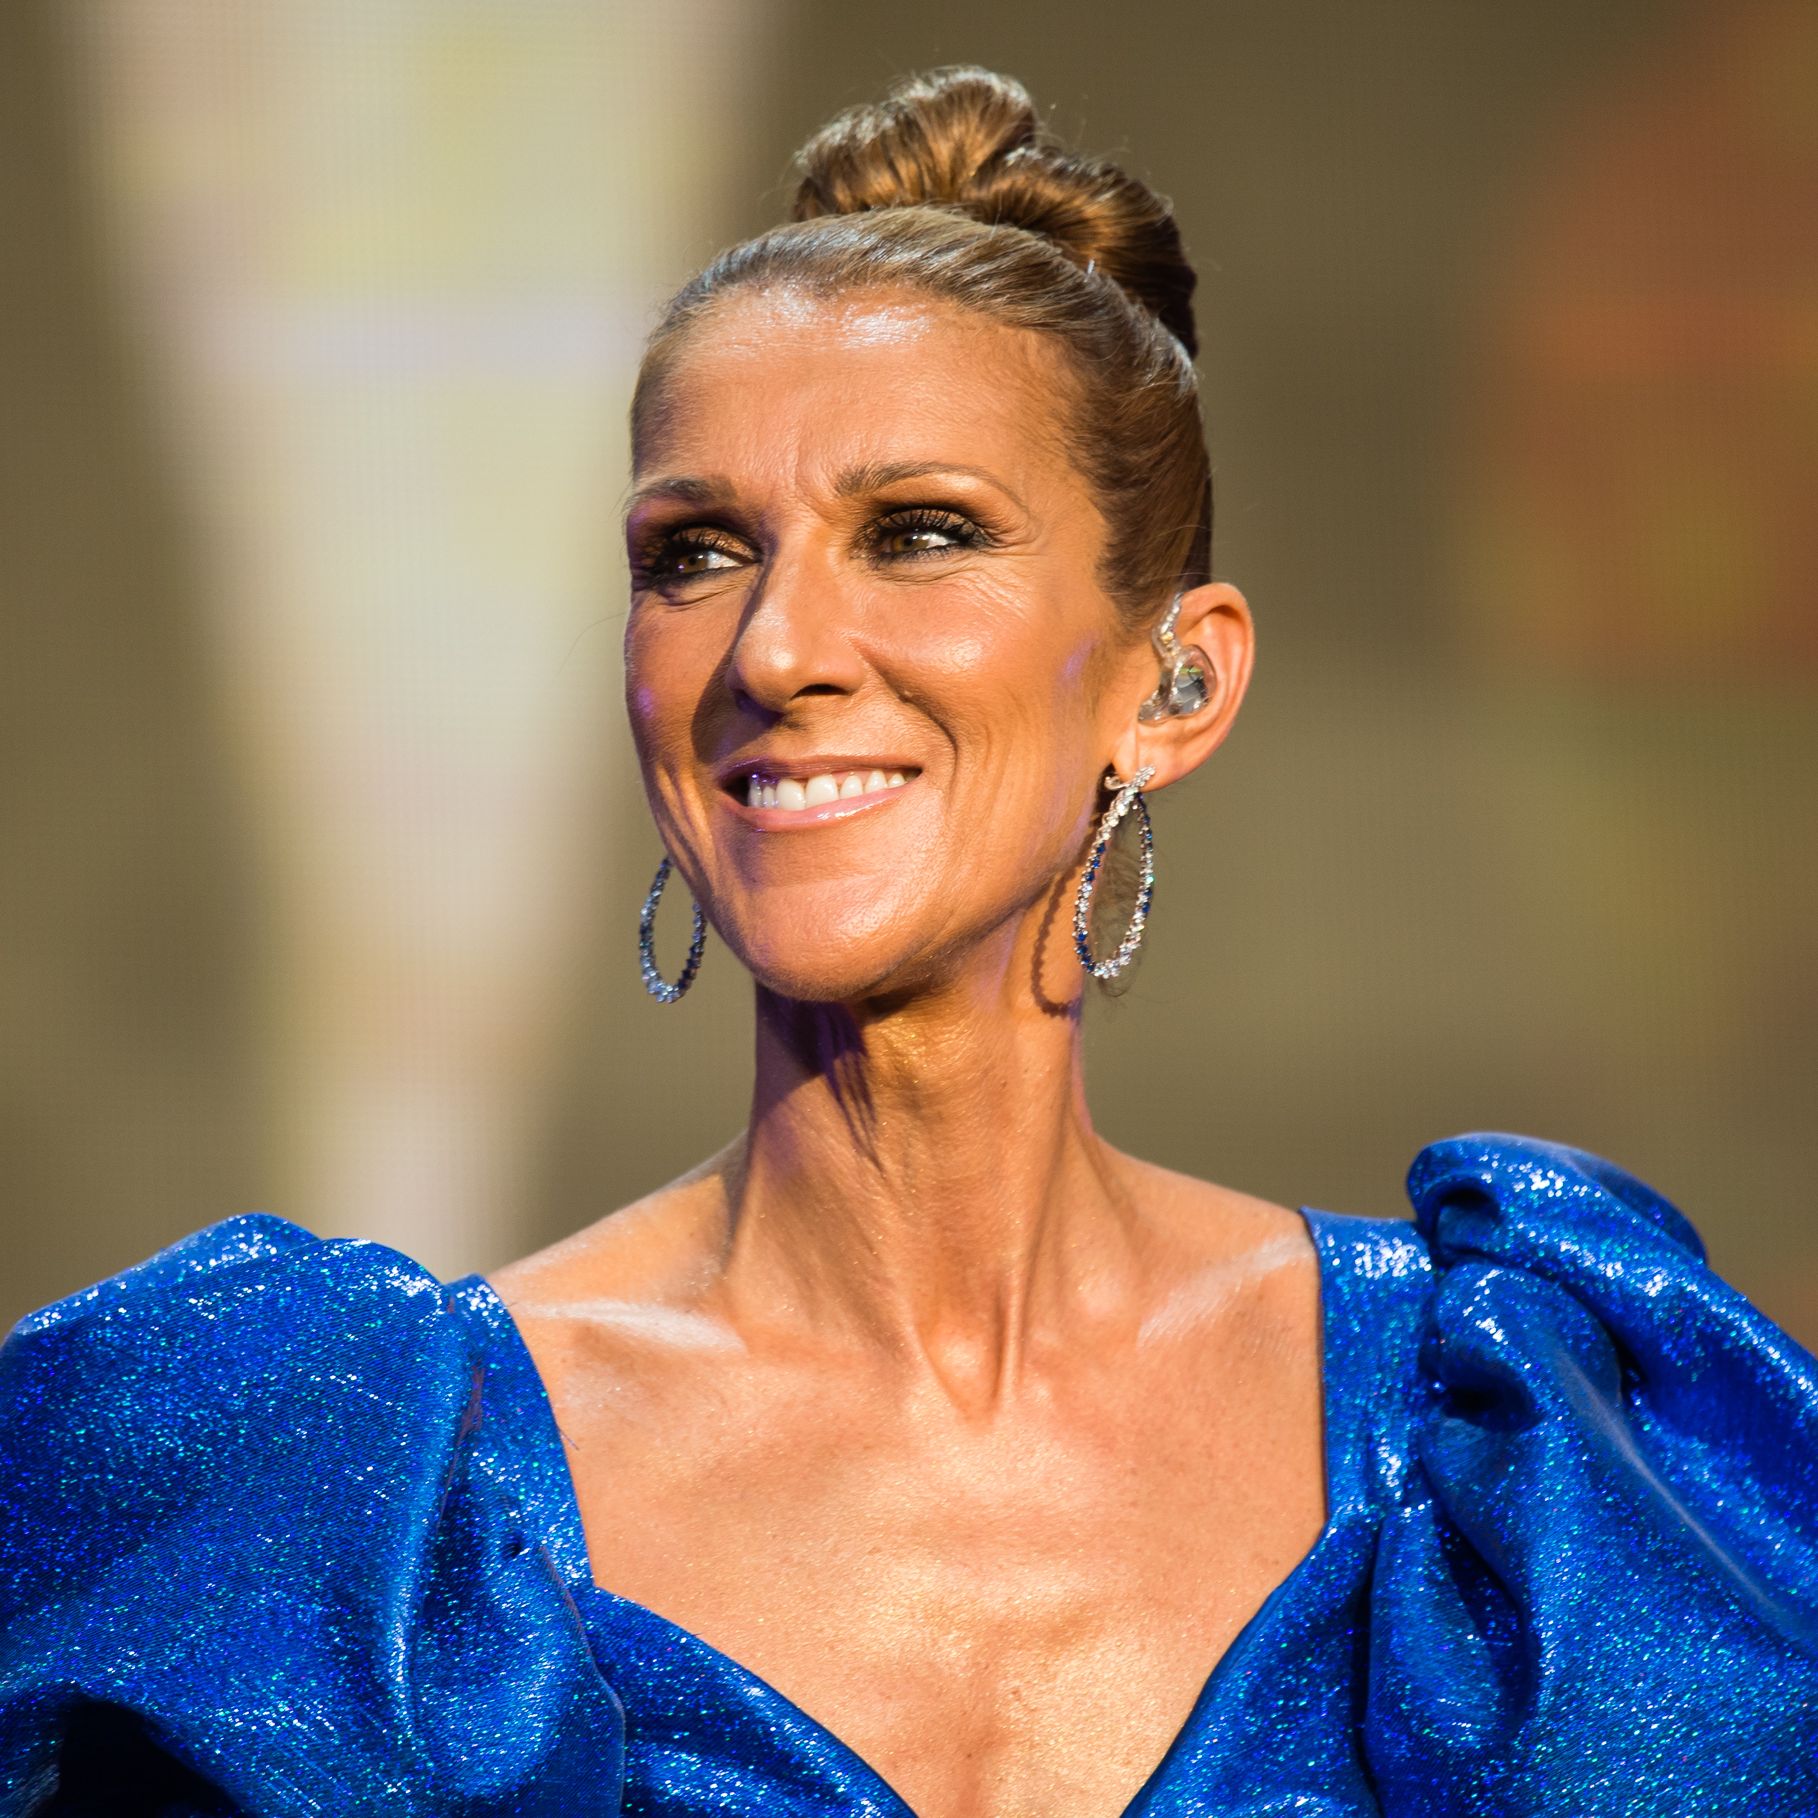 Celebrities and Fans Show Support for Céline Dion After Seeing Her Heartbreaking Instagram